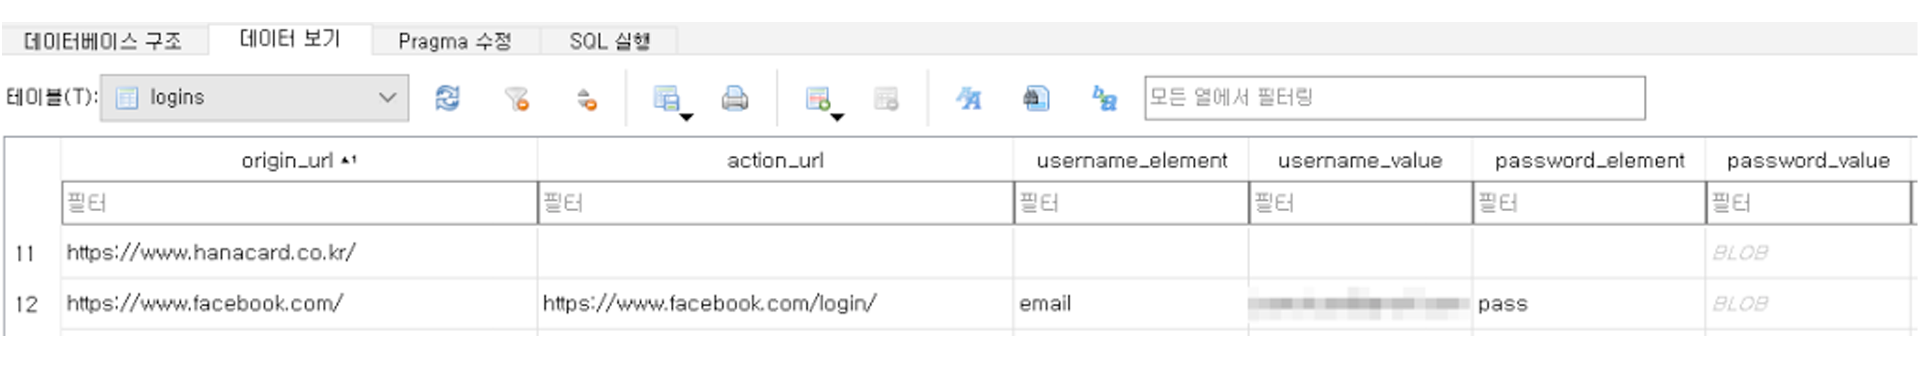 An example of login credentials stored in a browser's login table.